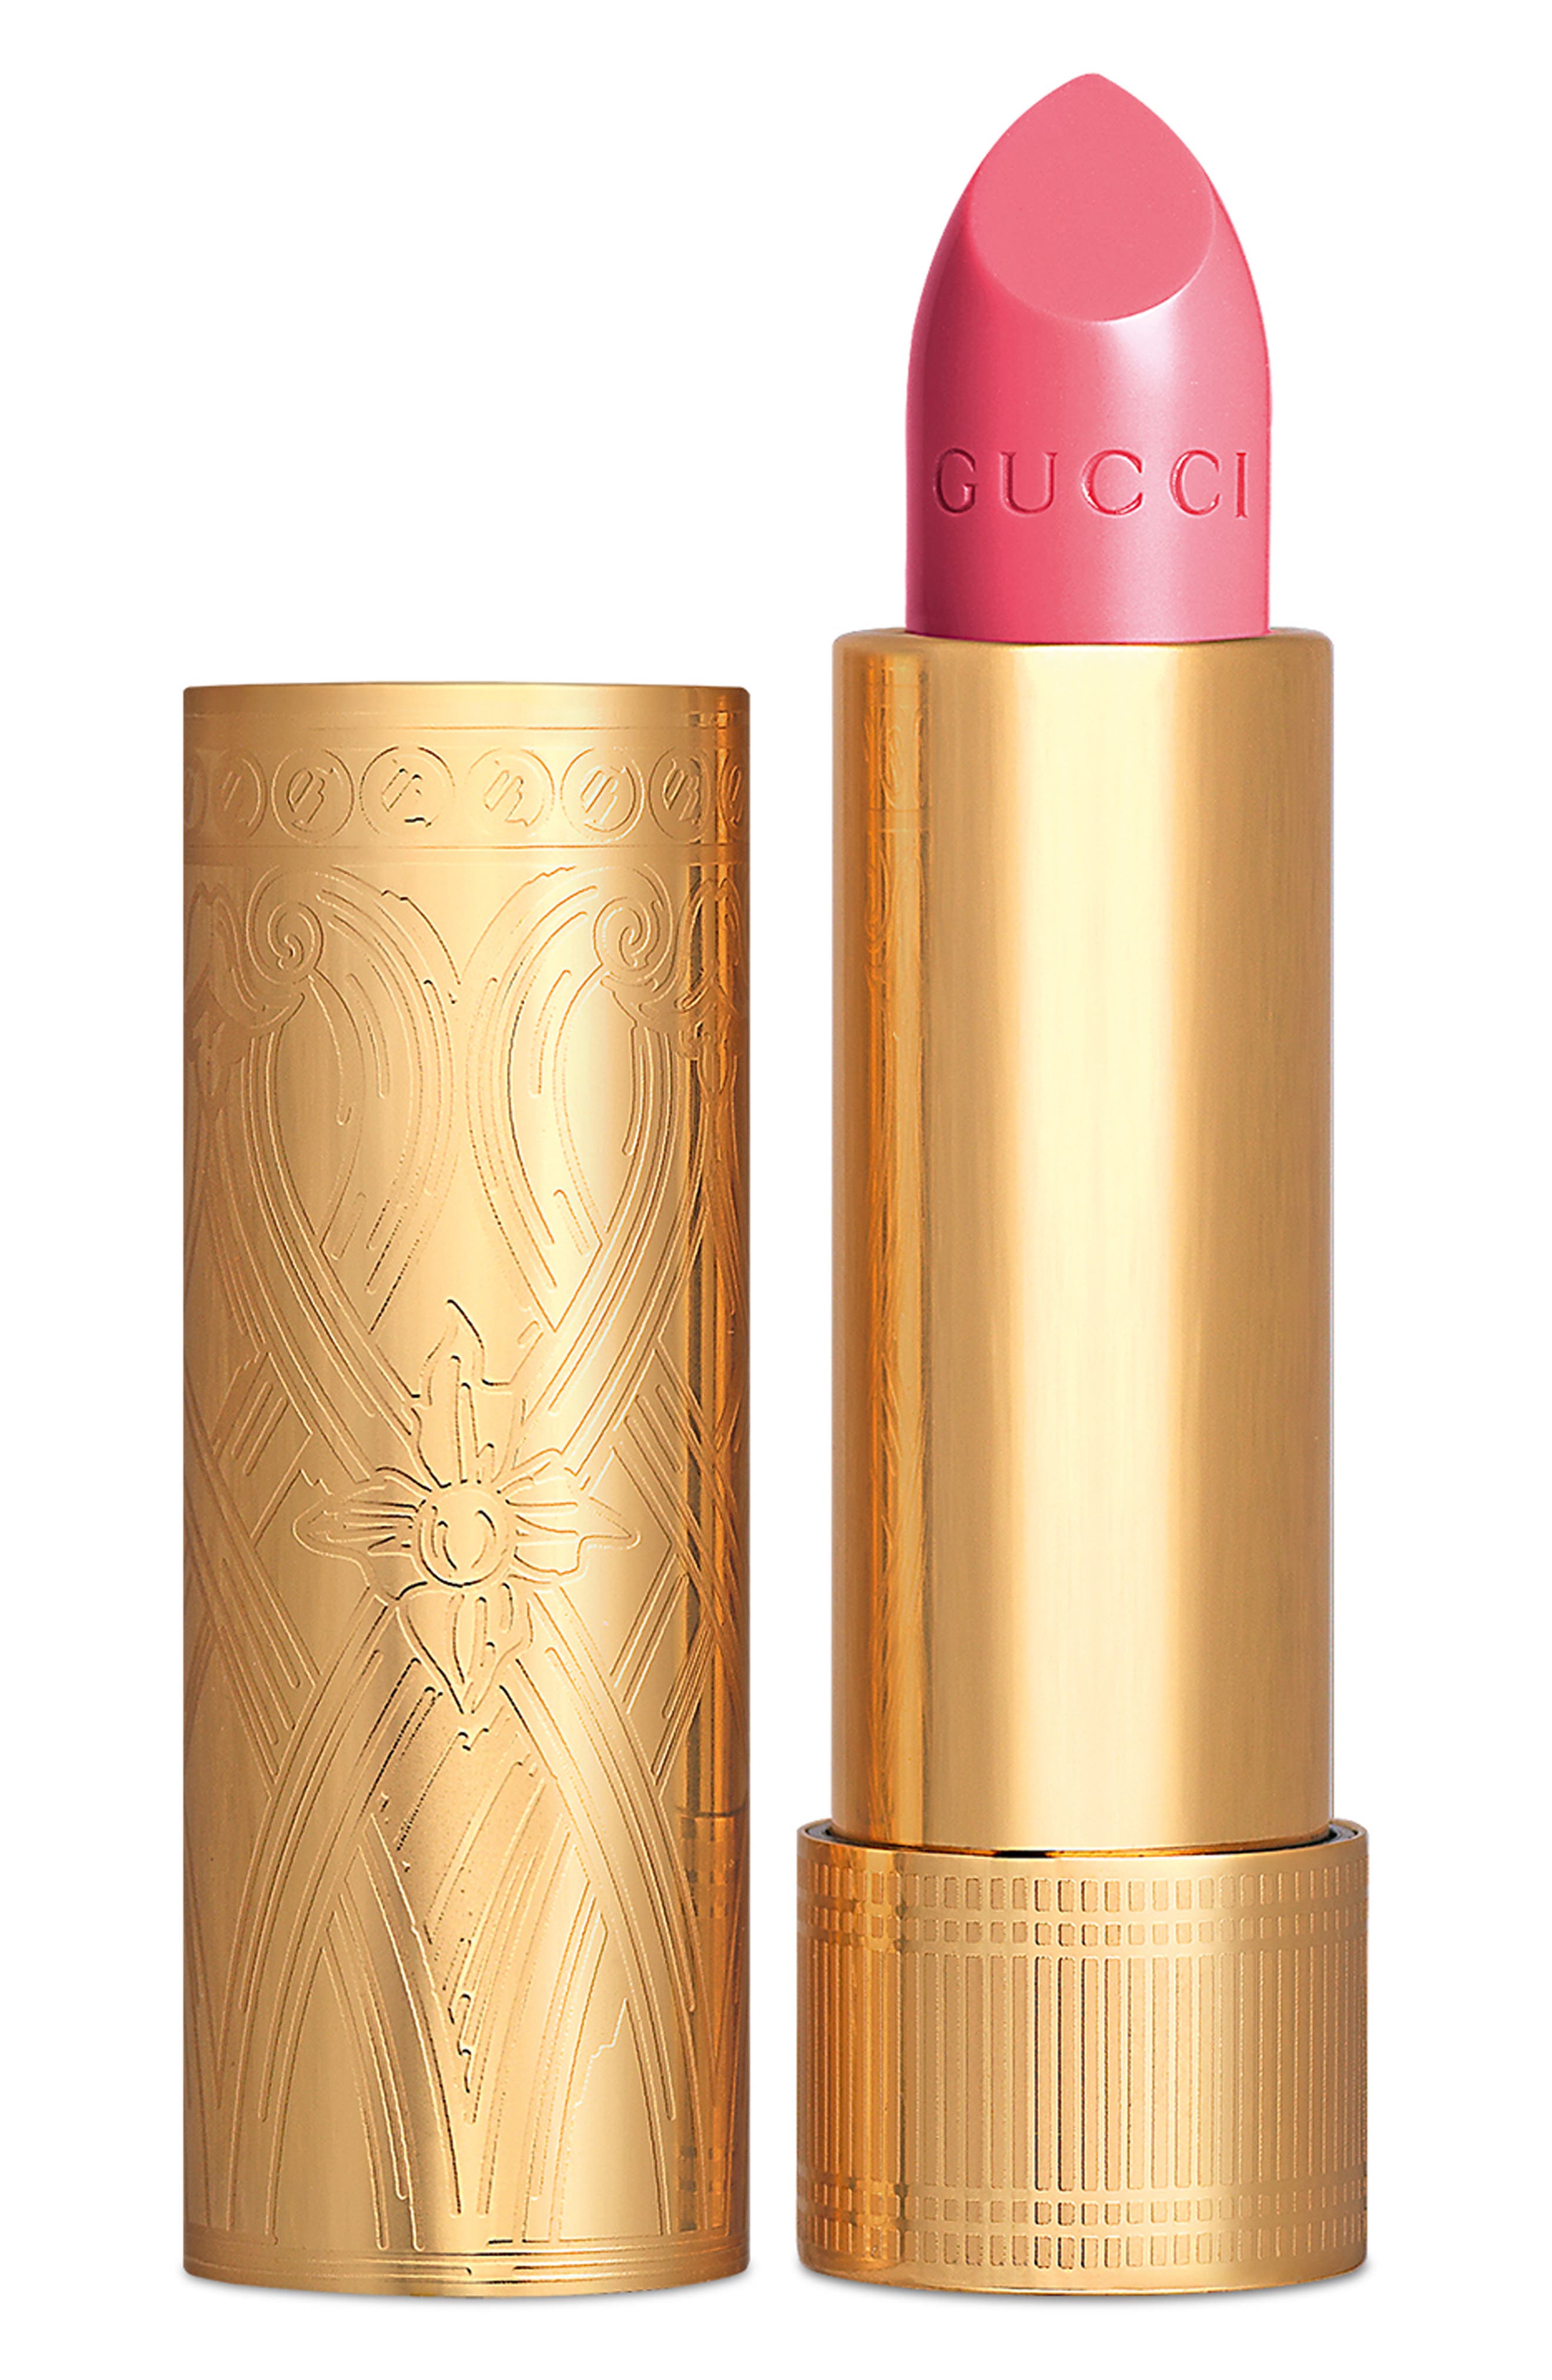 Gucci Rouge a Levres Satin Lipstick in Kimberley Rose at Nordstrom